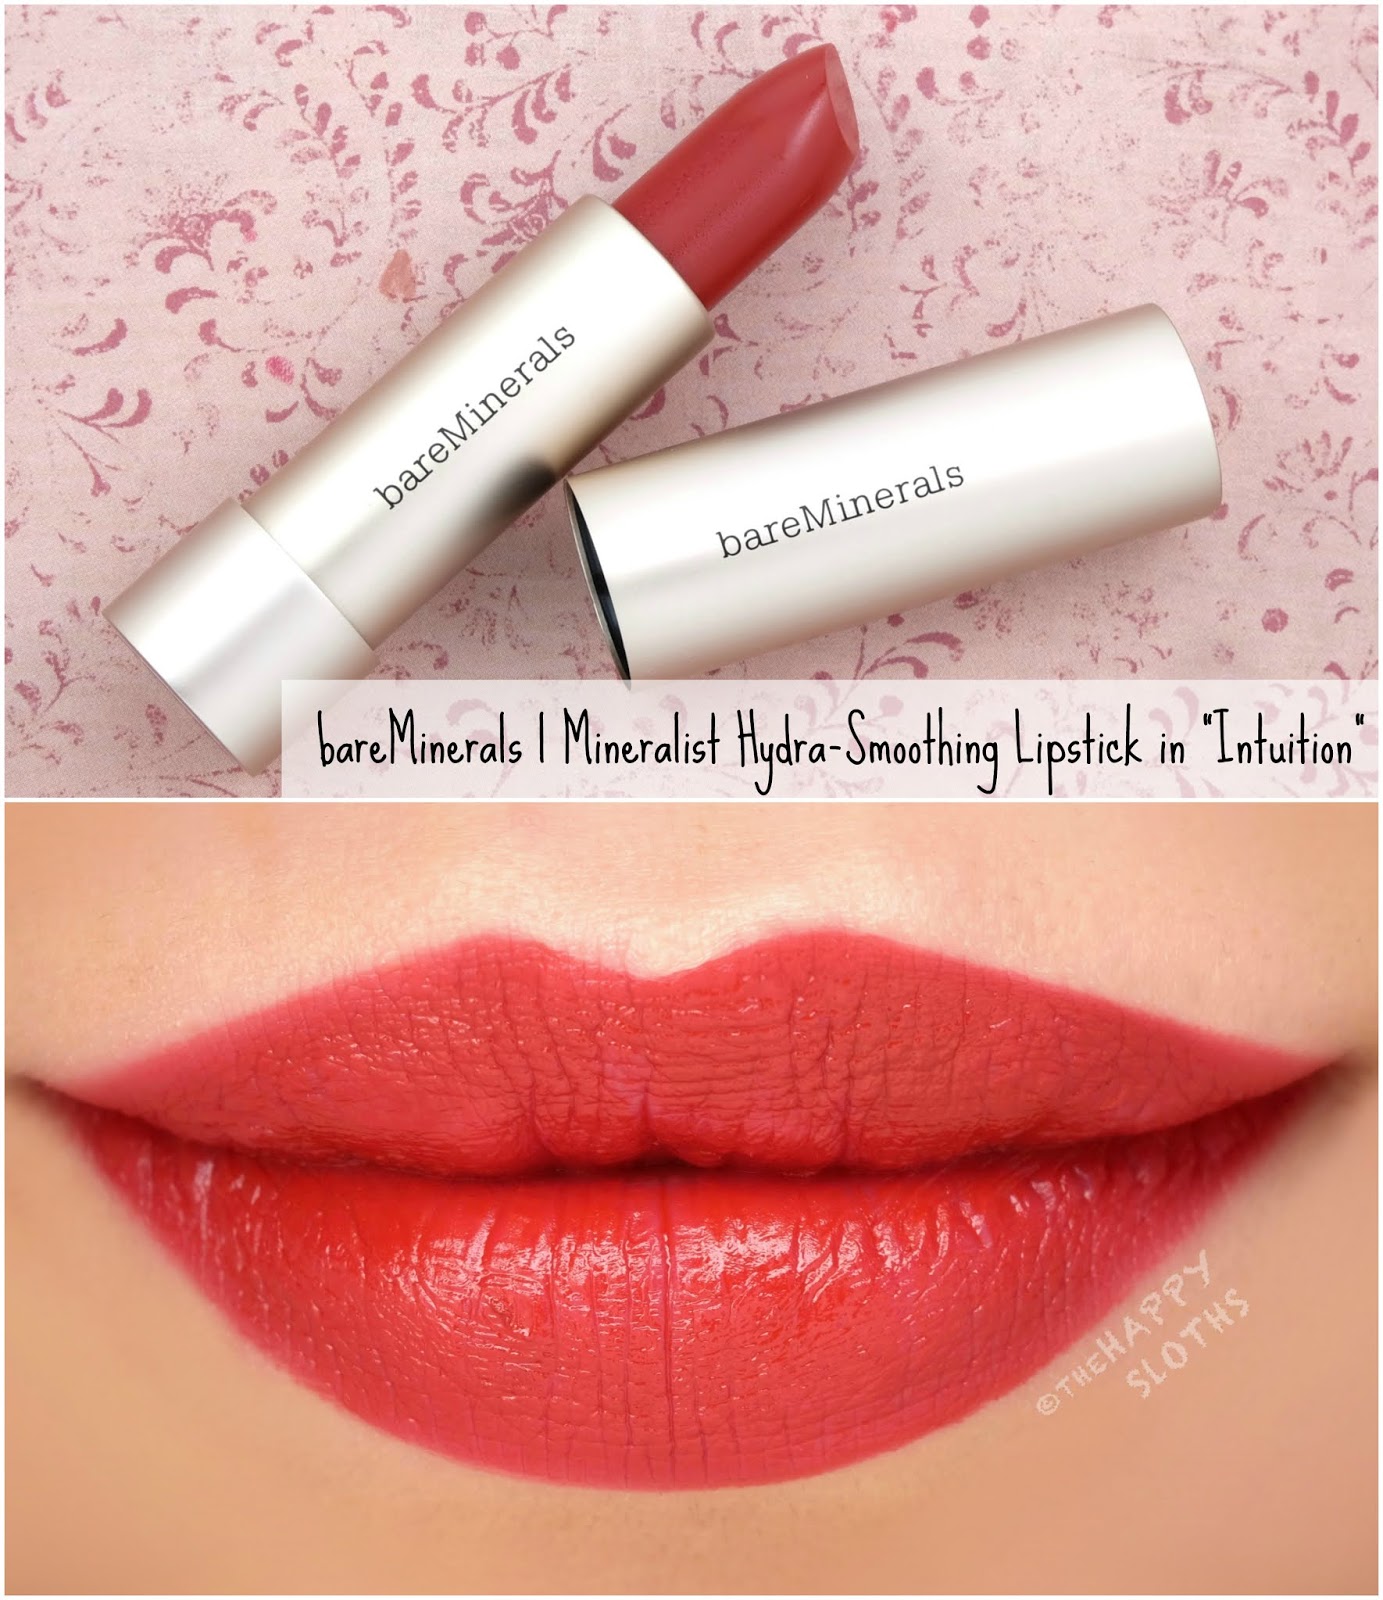 bareMinerals | Mineralist Hydra-Smoothing Lipstick in "Intuition": Review and Swatches